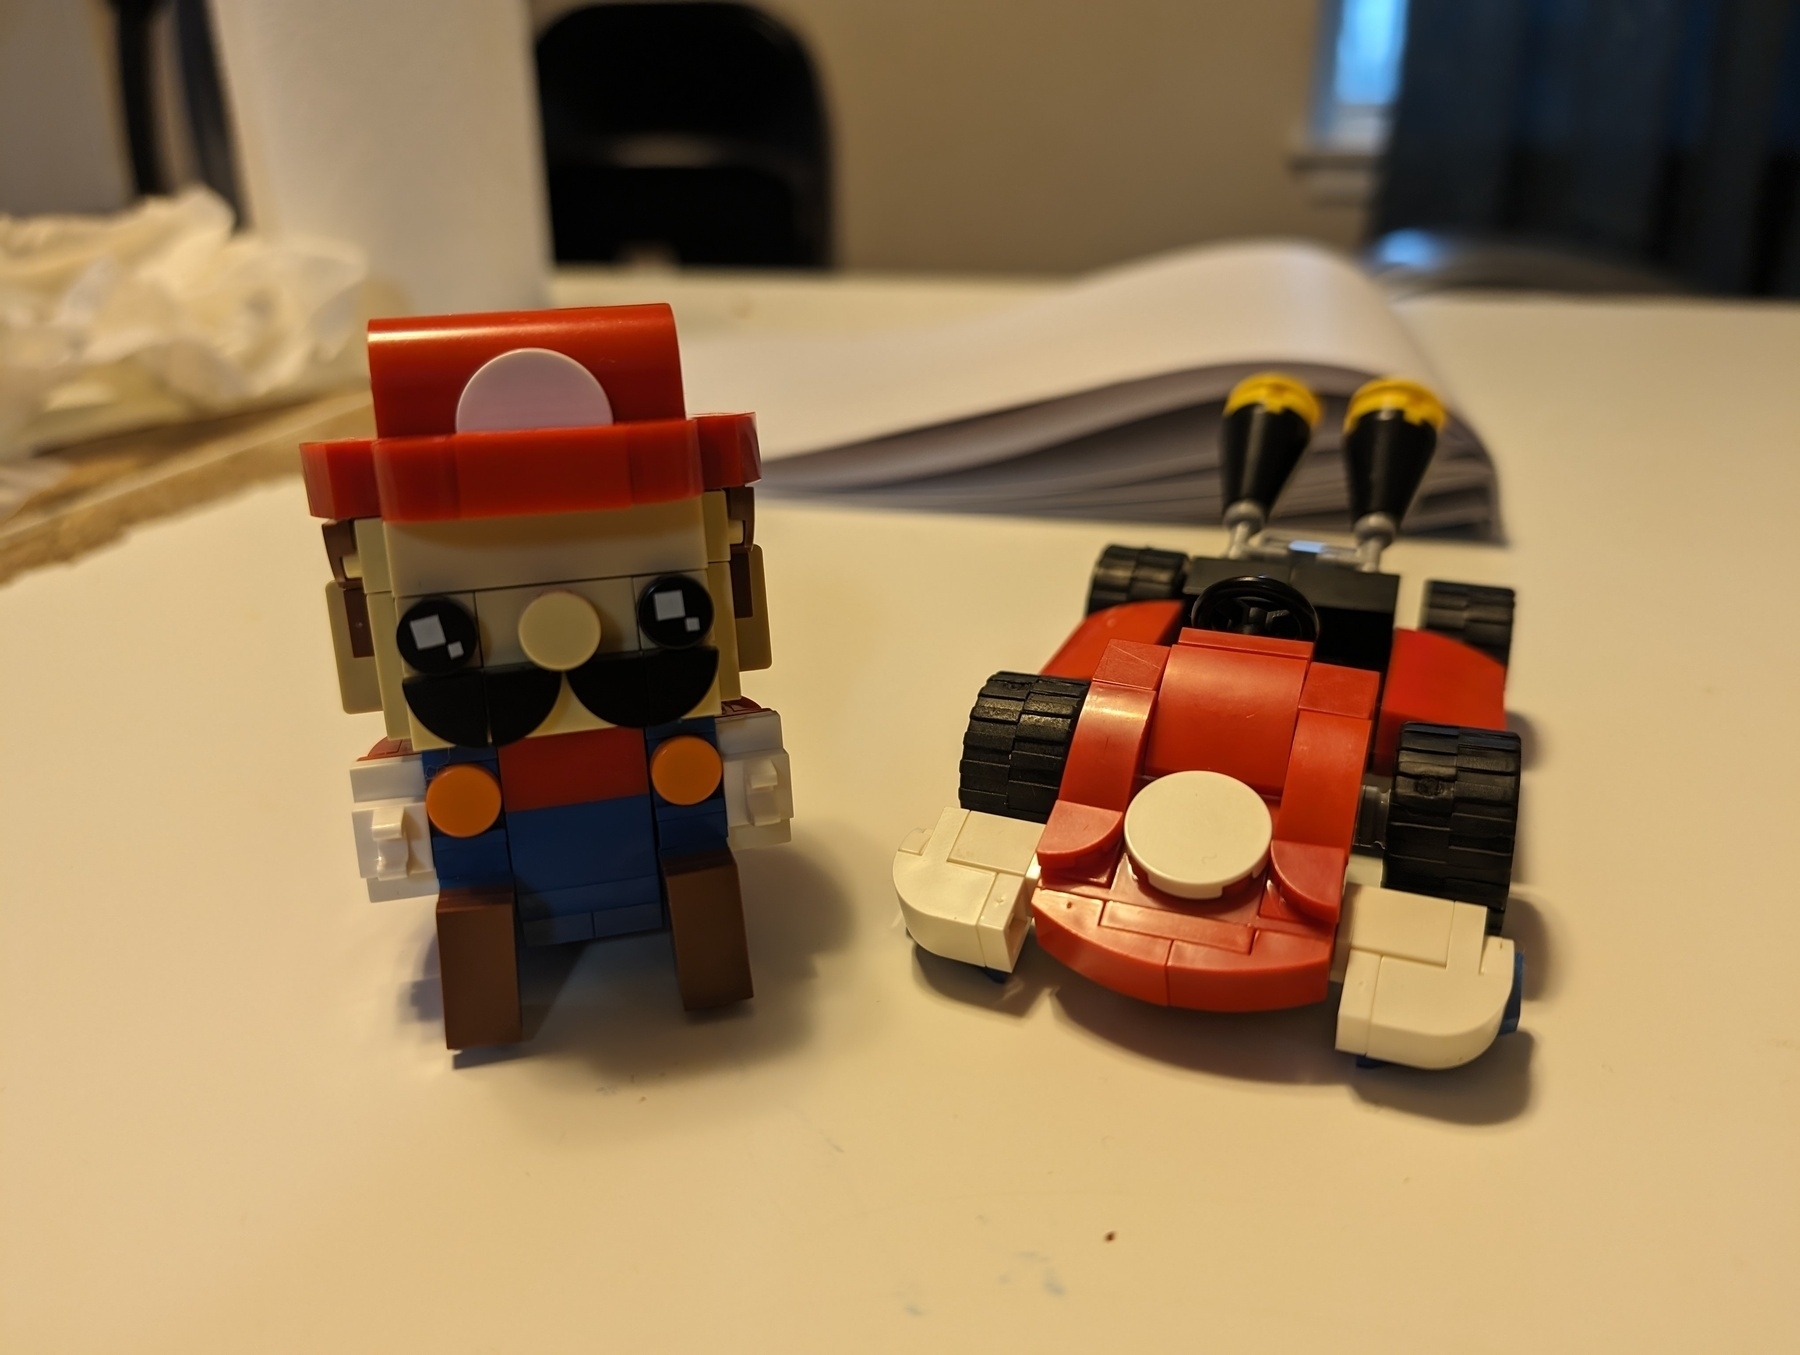 Photo of a figure built out of a brick building system, in the style of a popular character that can sit in a go cart. Any resemblance to any known character is purely coincidental.